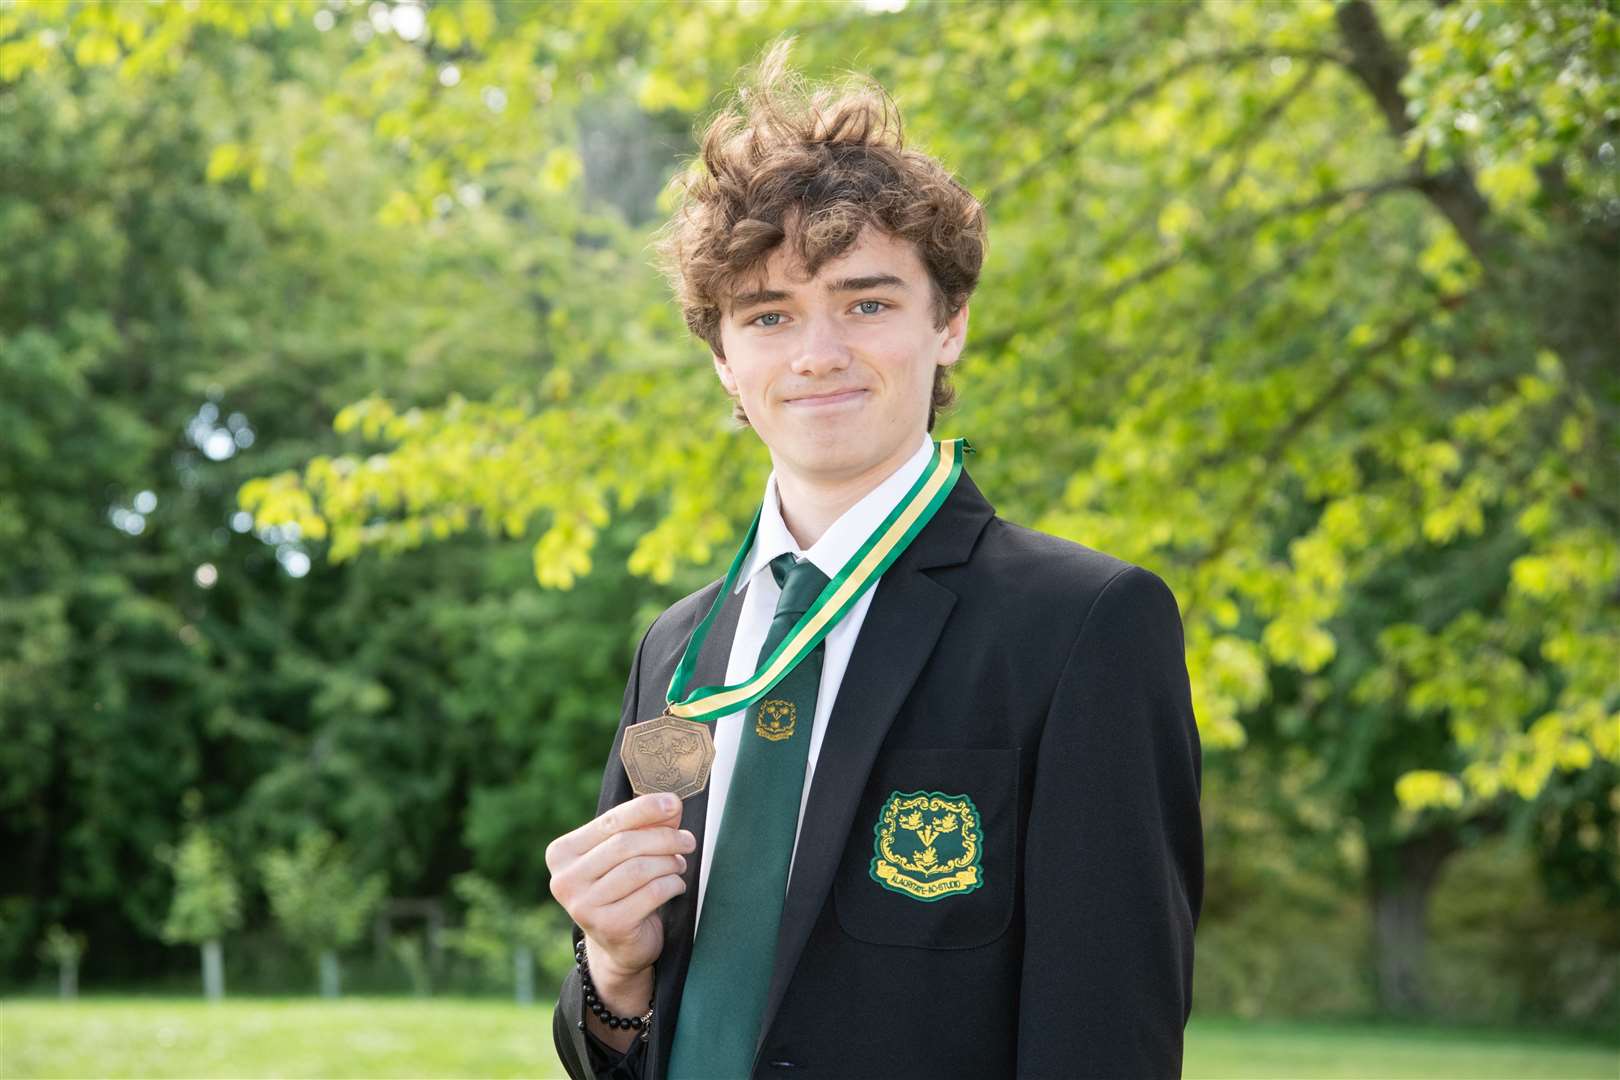 S5 Dux at Milne's High School Joshua Ward proudly shows off his Sir Ashley Mackintosh Medal. Picture: Daniel Forsyth